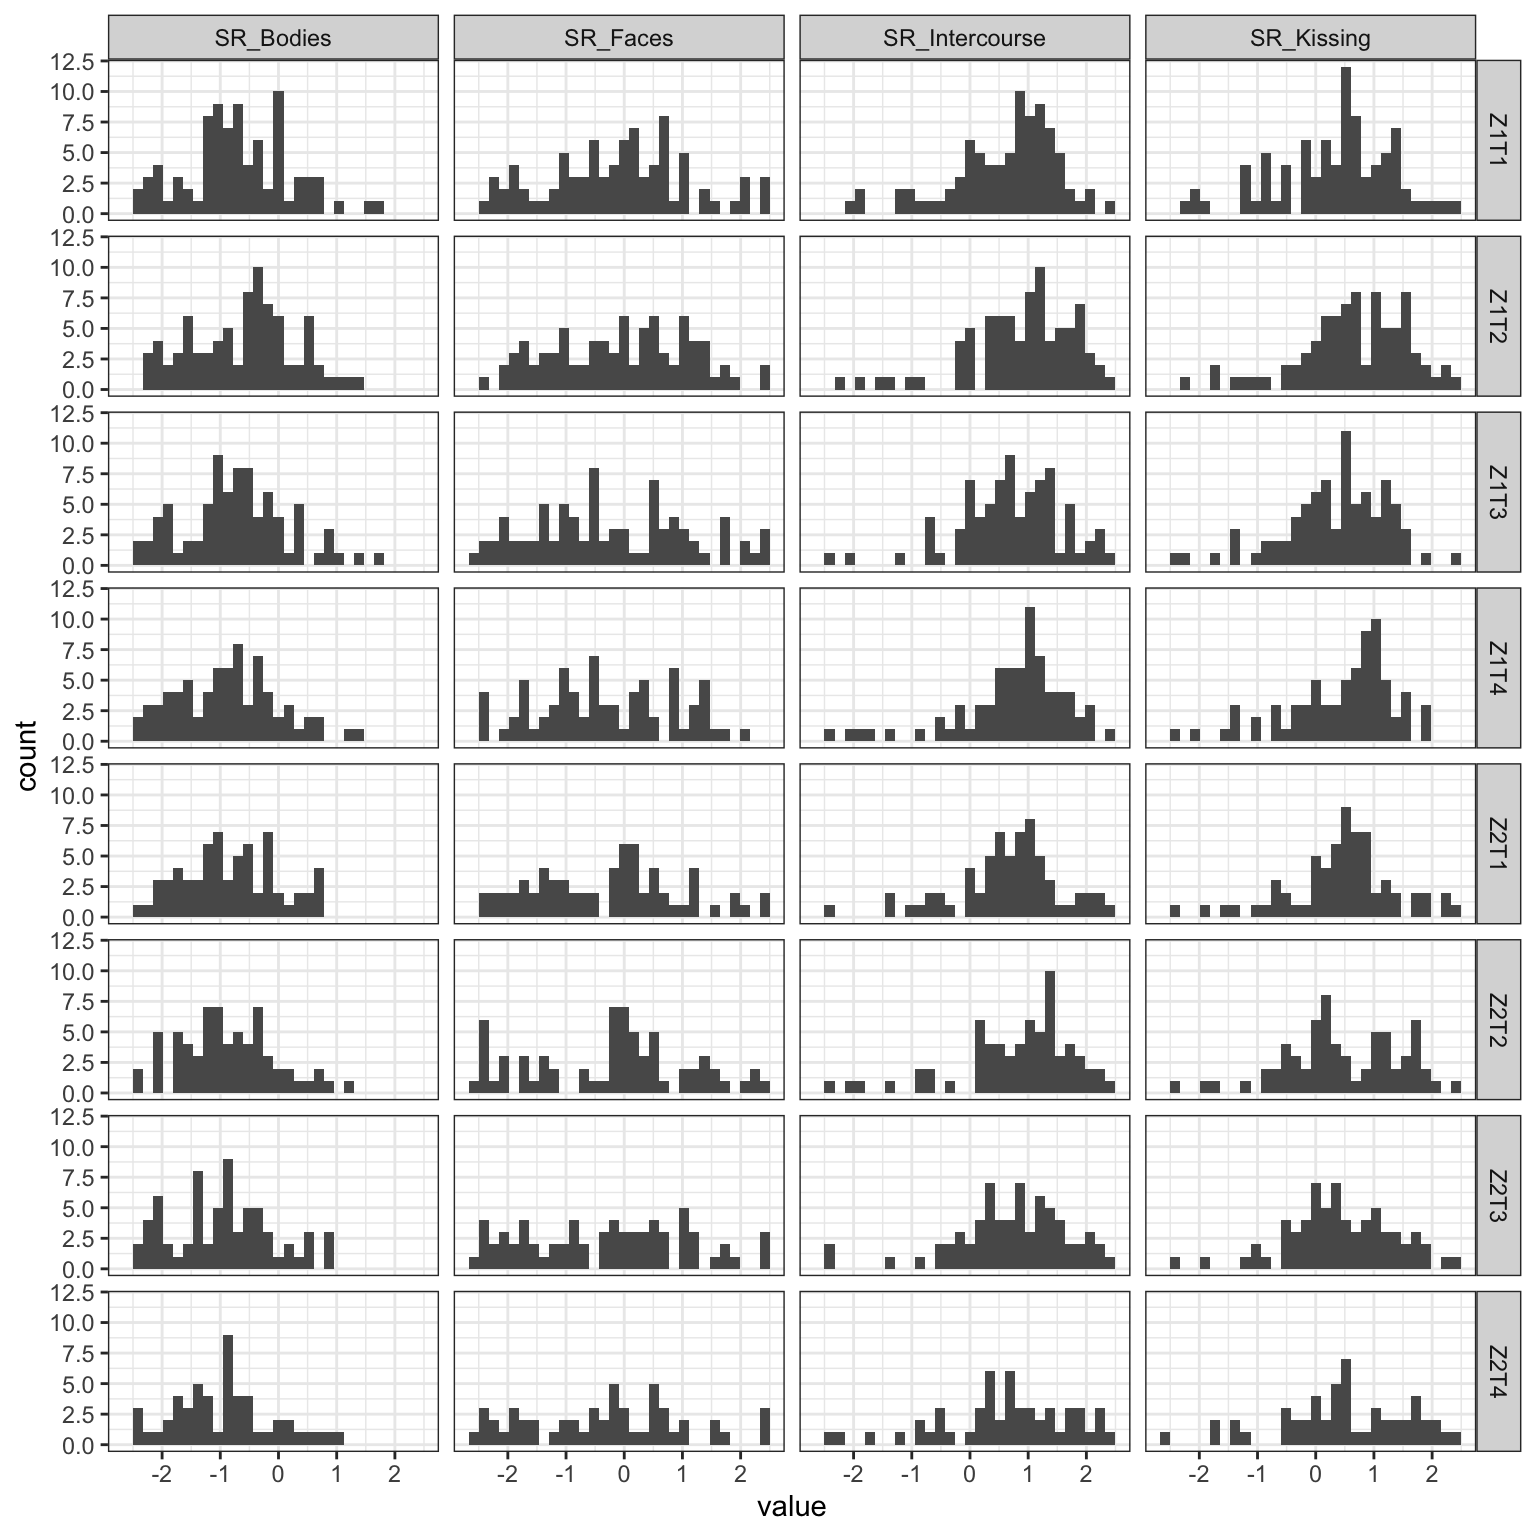 Distributions of the outcome visual analogue scale ratings over time. (Z=cycle, T=time point)